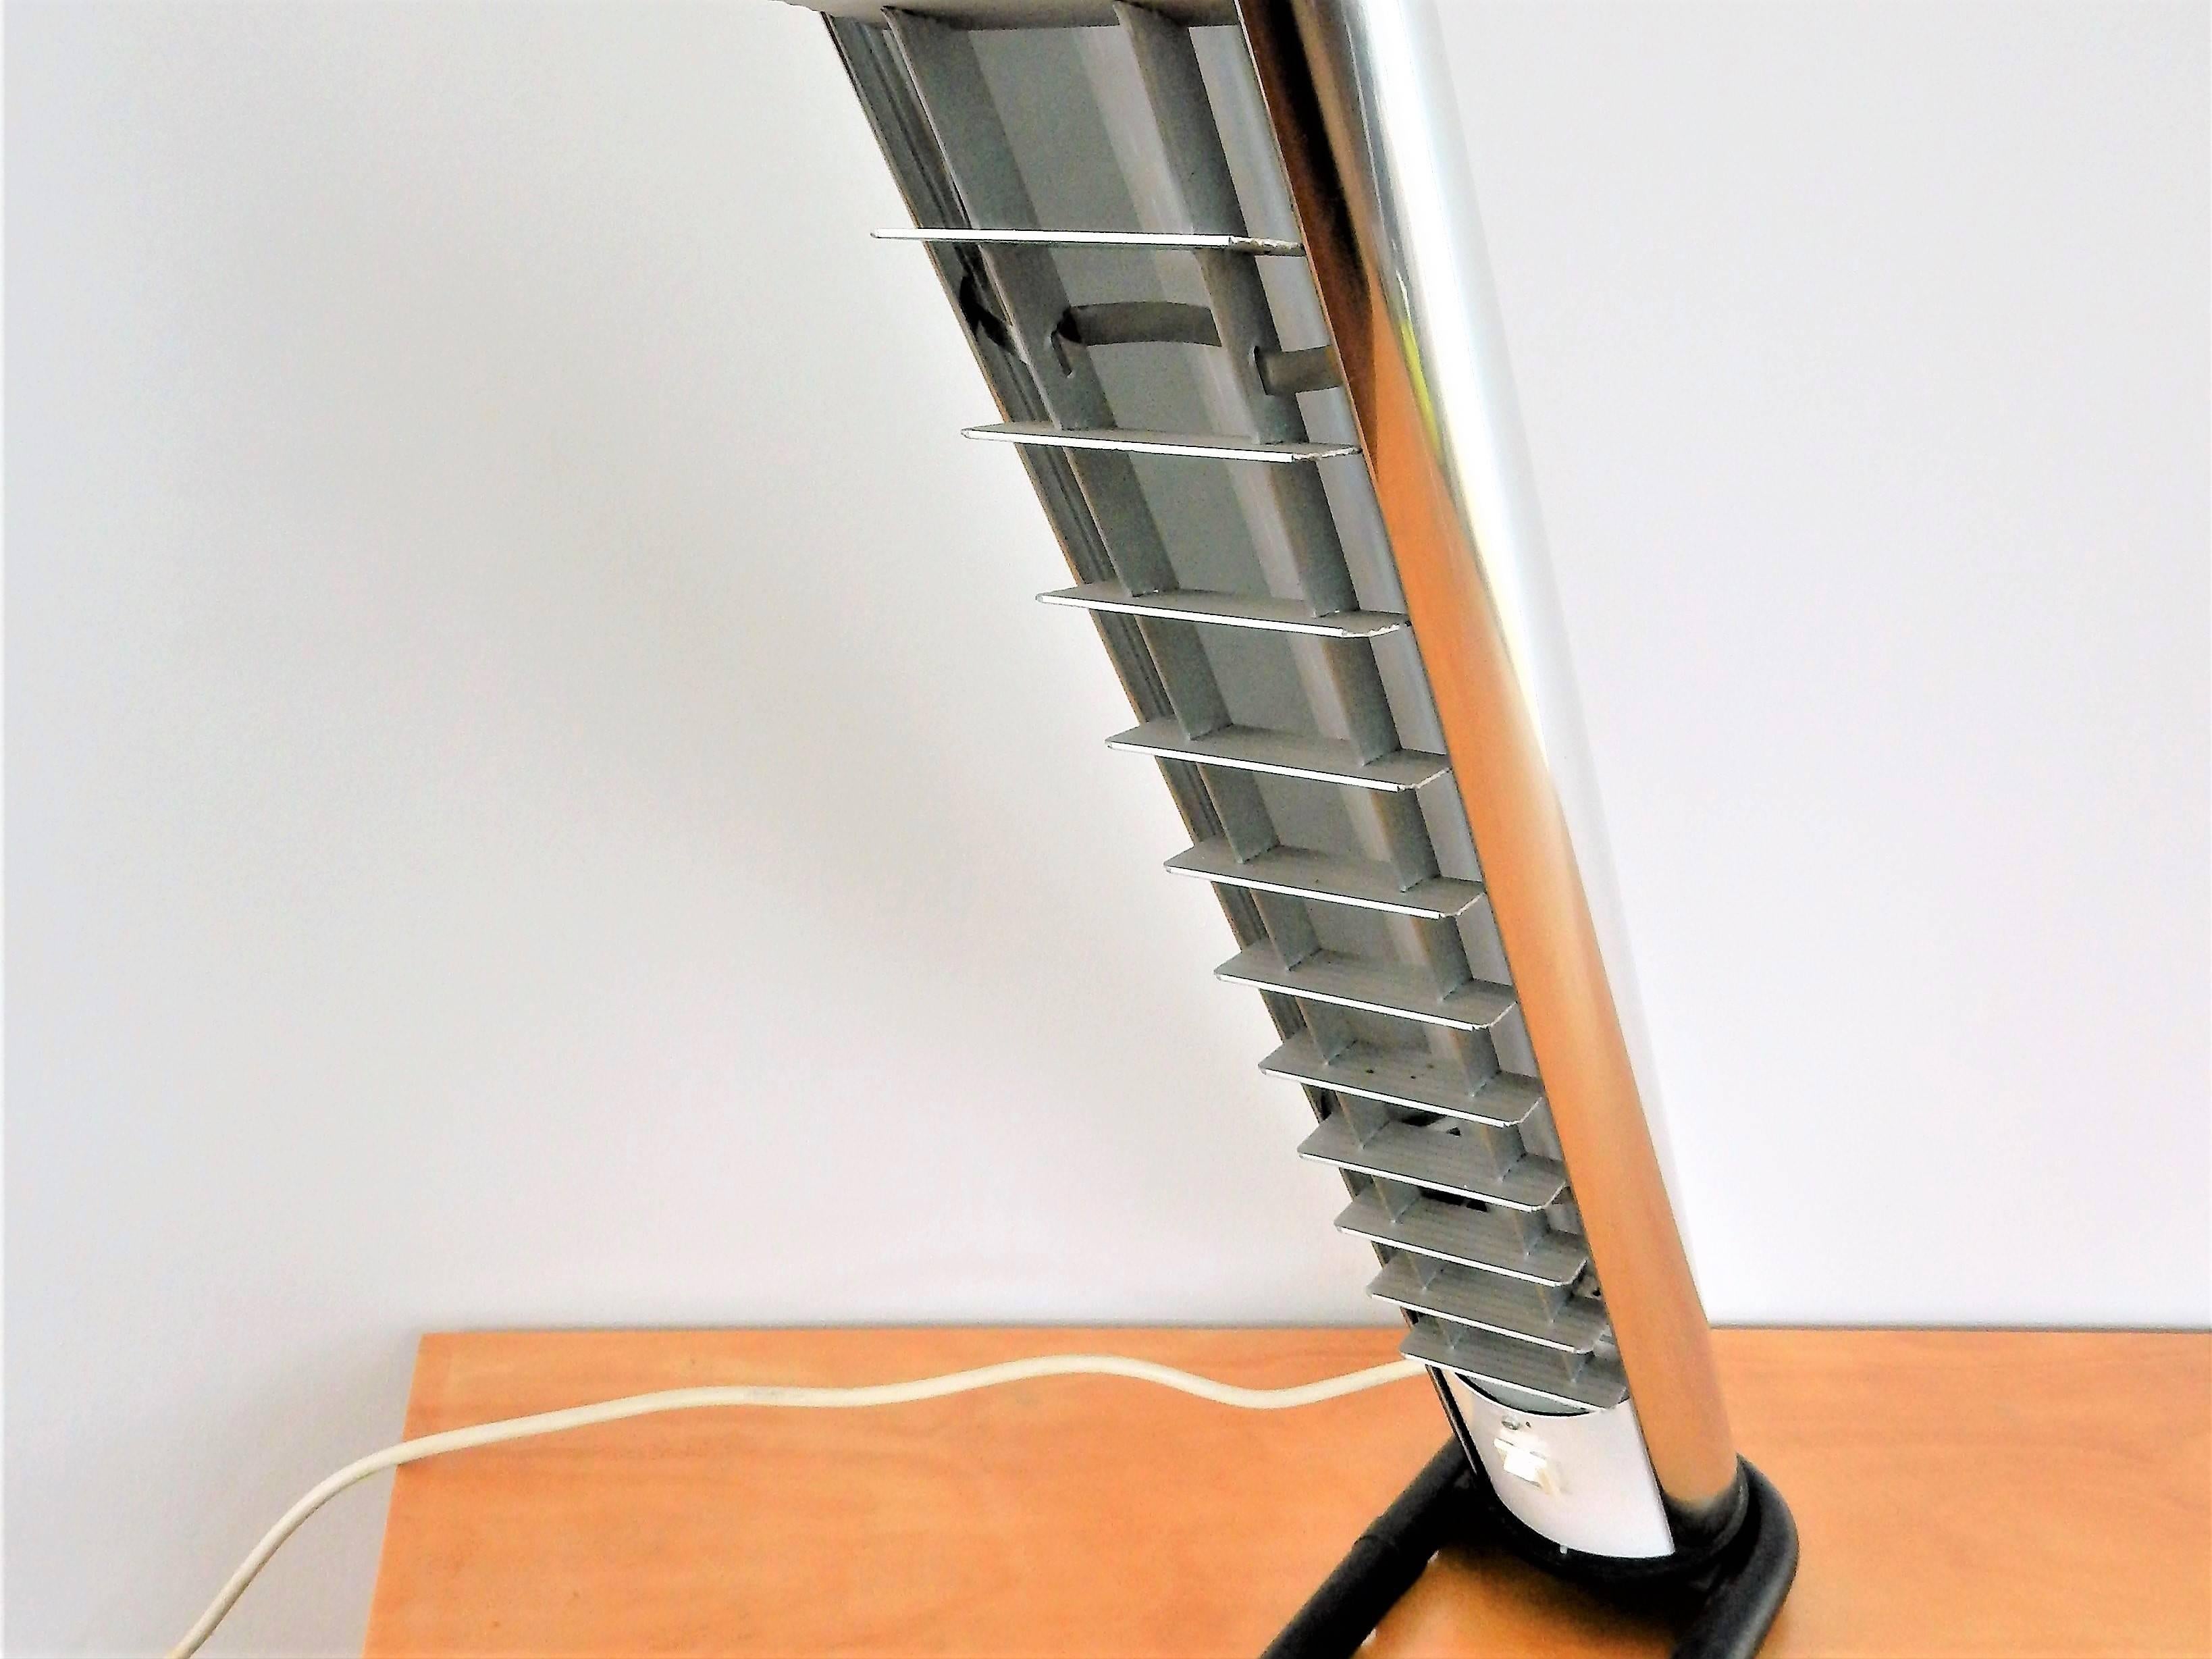 Tube Shape Desk Lamp by Göran Pehrson for Ateljé Lyktan, 1978 In Good Condition For Sale In Steenwijk, NL